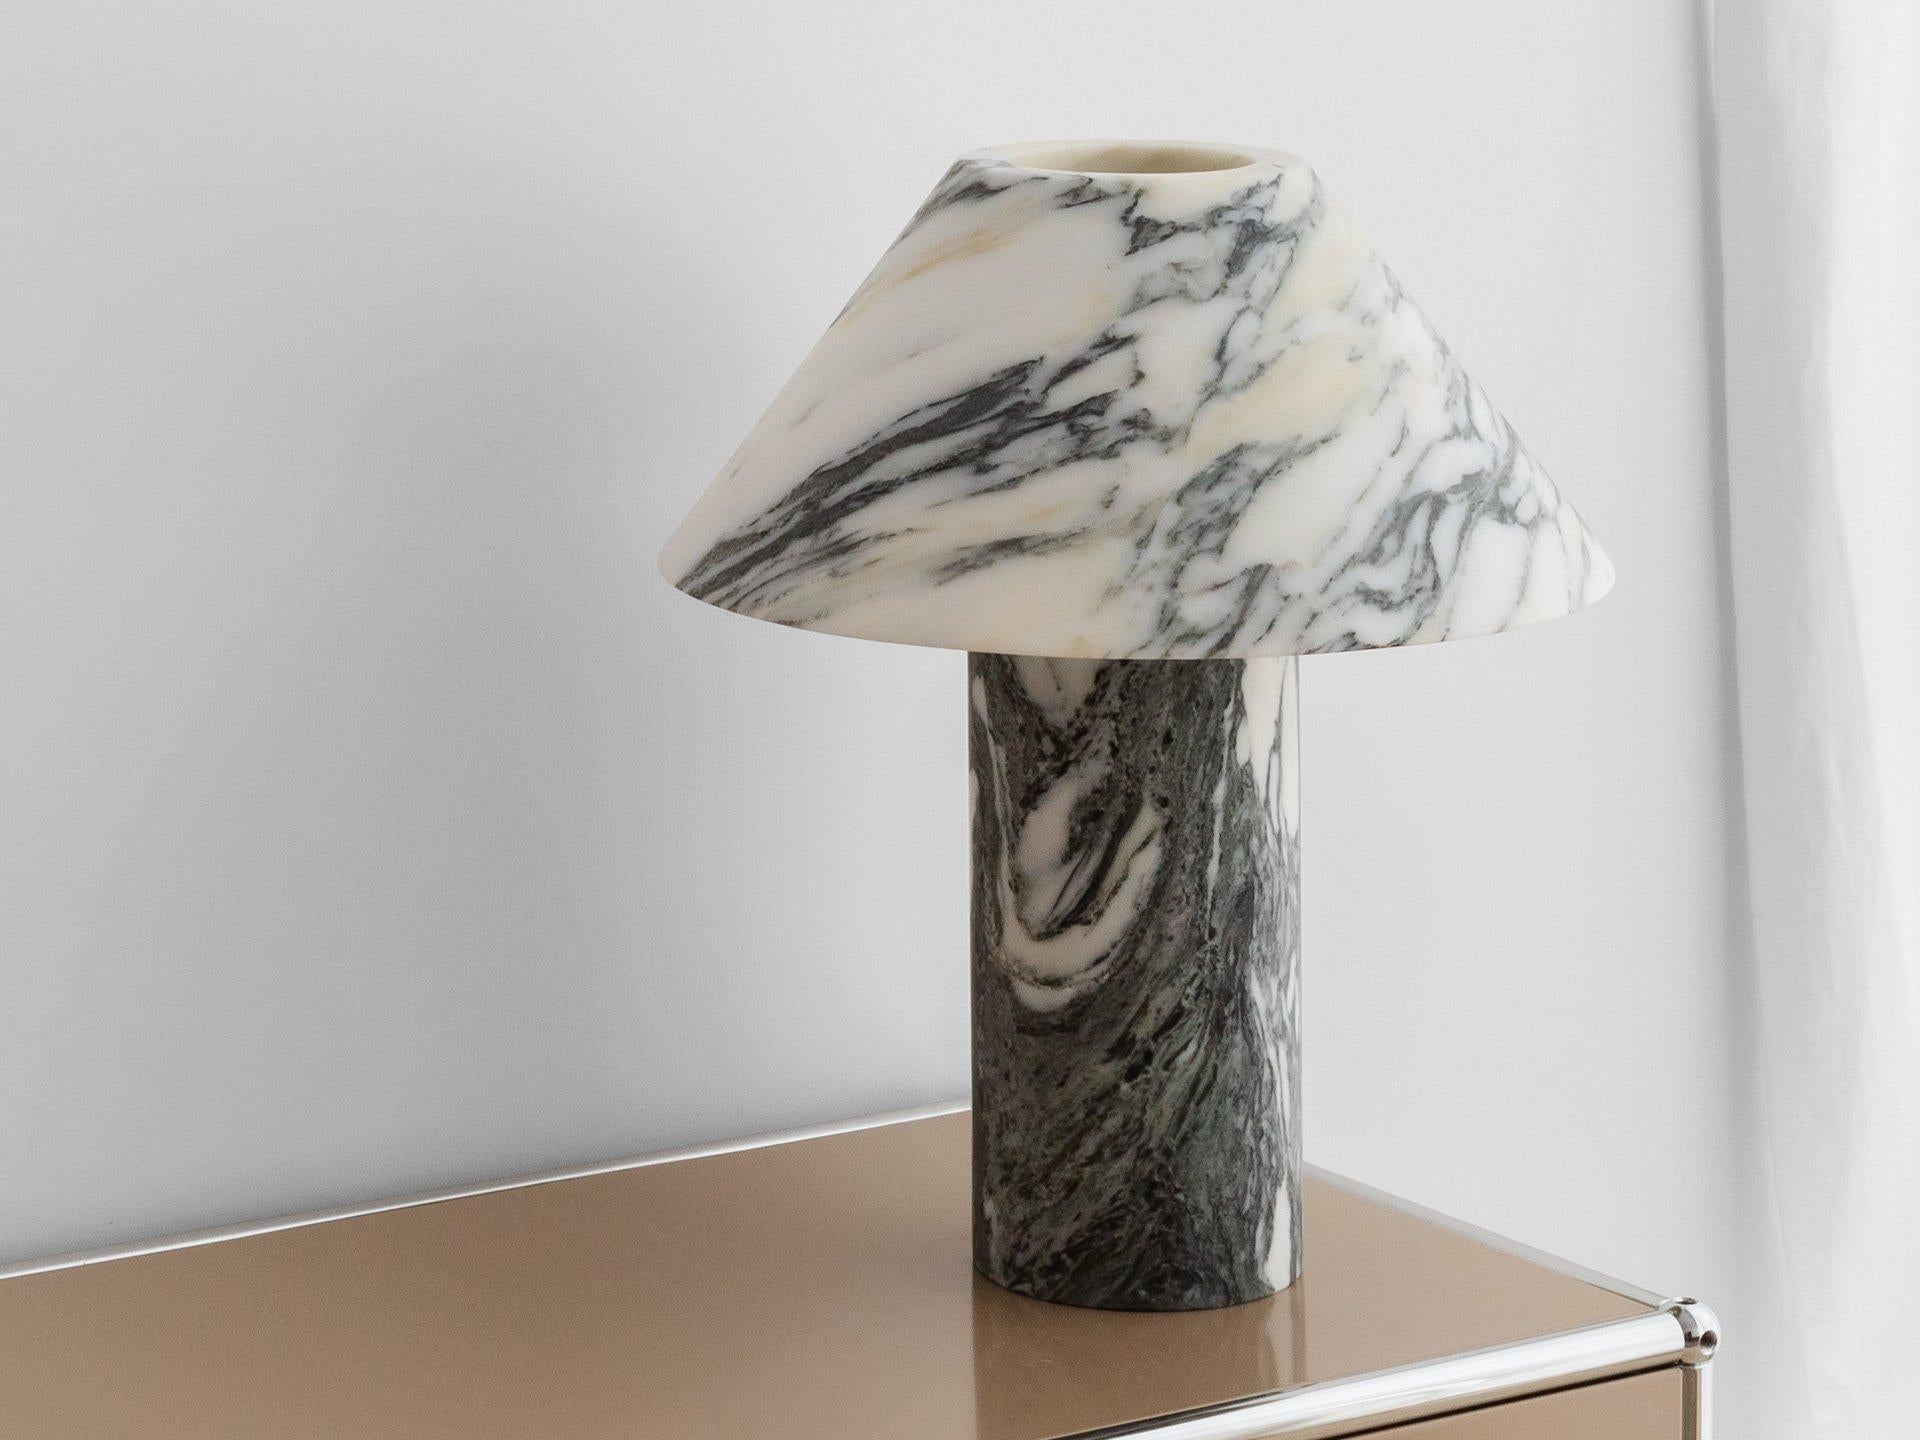 Pillar lamp in Arabescato marble by Henry Wilson
Dimensions: 40 x 12 x 35 cm
Materials: Arabescato marble

Pillar Lamp is hewn from two pieces of solid Arabescato Marble. It is heavy and will require care in transport and a sturdy surface to